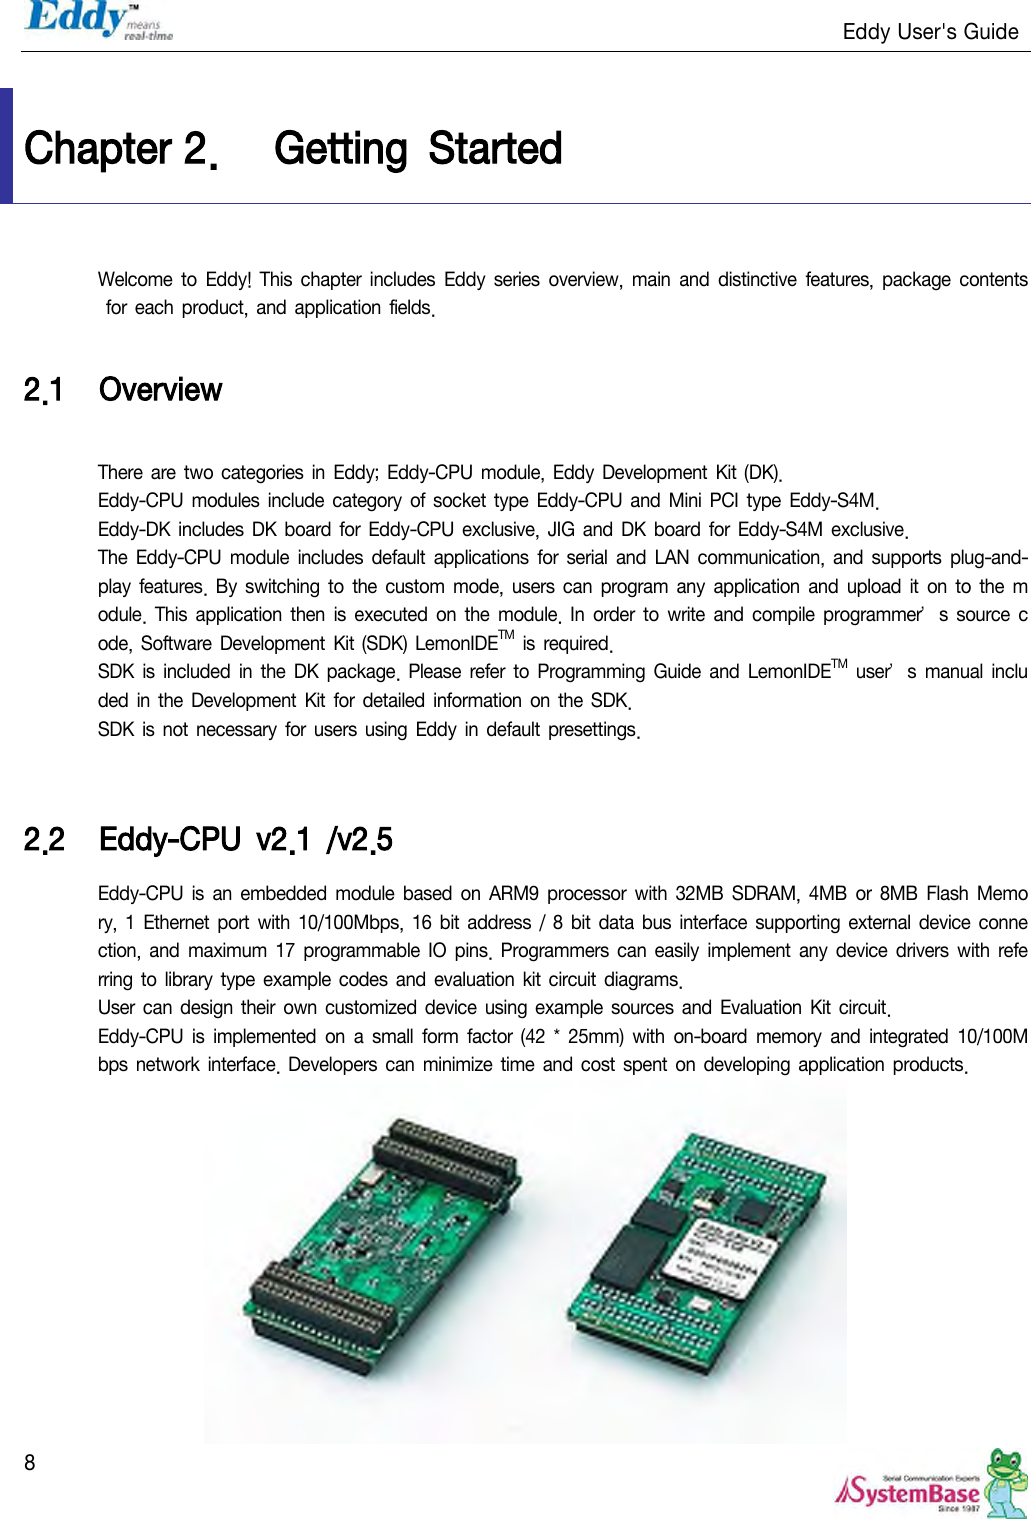                                                                   Eddy User&apos;s Guide   8  Chapter 2. Getting  Started Welcome  to Eddy!  This  chapter  includes  Eddy  series  overview,  main  and  distinctive  features, package contents for each  product, and application fields.  2.1 Overview  There are two categories in Eddy; Eddy-CPU  module, Eddy  Development Kit (DK). Eddy-CPU  modules include  category  of socket type Eddy-CPU  and  Mini  PCI type Eddy-S4M. Eddy-DK includes DK board for  Eddy-CPU exclusive, JIG and  DK board for Eddy-S4M exclusive.   The  Eddy-CPU module  includes  default  applications  for serial  and LAN  communication,  and supports  plug-and-play  features.  By  switching  to  the  custom  mode, users  can  program  any application and upload it  on to  the  module. This application then is executed  on  the  module. In  order  to  write and compile programmer’s source code, Software  Development Kit (SDK) LemonIDETM is required. SDK  is included  in the DK  package.  Please  refer to  Programming  Guide  and LemonIDETM user’s  manual included  in the Development Kit for detailed  information on the SDK. SDK is not necessary for users using Eddy  in default  presettings.   2.2 Eddy-CPU  v2.1  /v2.5 Eddy-CPU  is  an  embedded  module based on  ARM9  processor  with  32MB  SDRAM, 4MB or 8MB  Flash Memory, 1 Ethernet port  with  10/100Mbps,  16 bit address  /  8 bit data bus interface  supporting external  device connection,  and maximum  17 programmable  IO  pins. Programmers  can easily implement  any device drivers  with  referring to library type example codes  and evaluation kit circuit diagrams. User can design their  own customized  device  using example sources  and  Evaluation  Kit circuit. Eddy-CPU  is  implemented  on  a  small form  factor  (42 *  25mm)  with  on-board  memory  and integrated  10/100Mbps network  interface. Developers can minimize time and cost  spent on developing application products.  